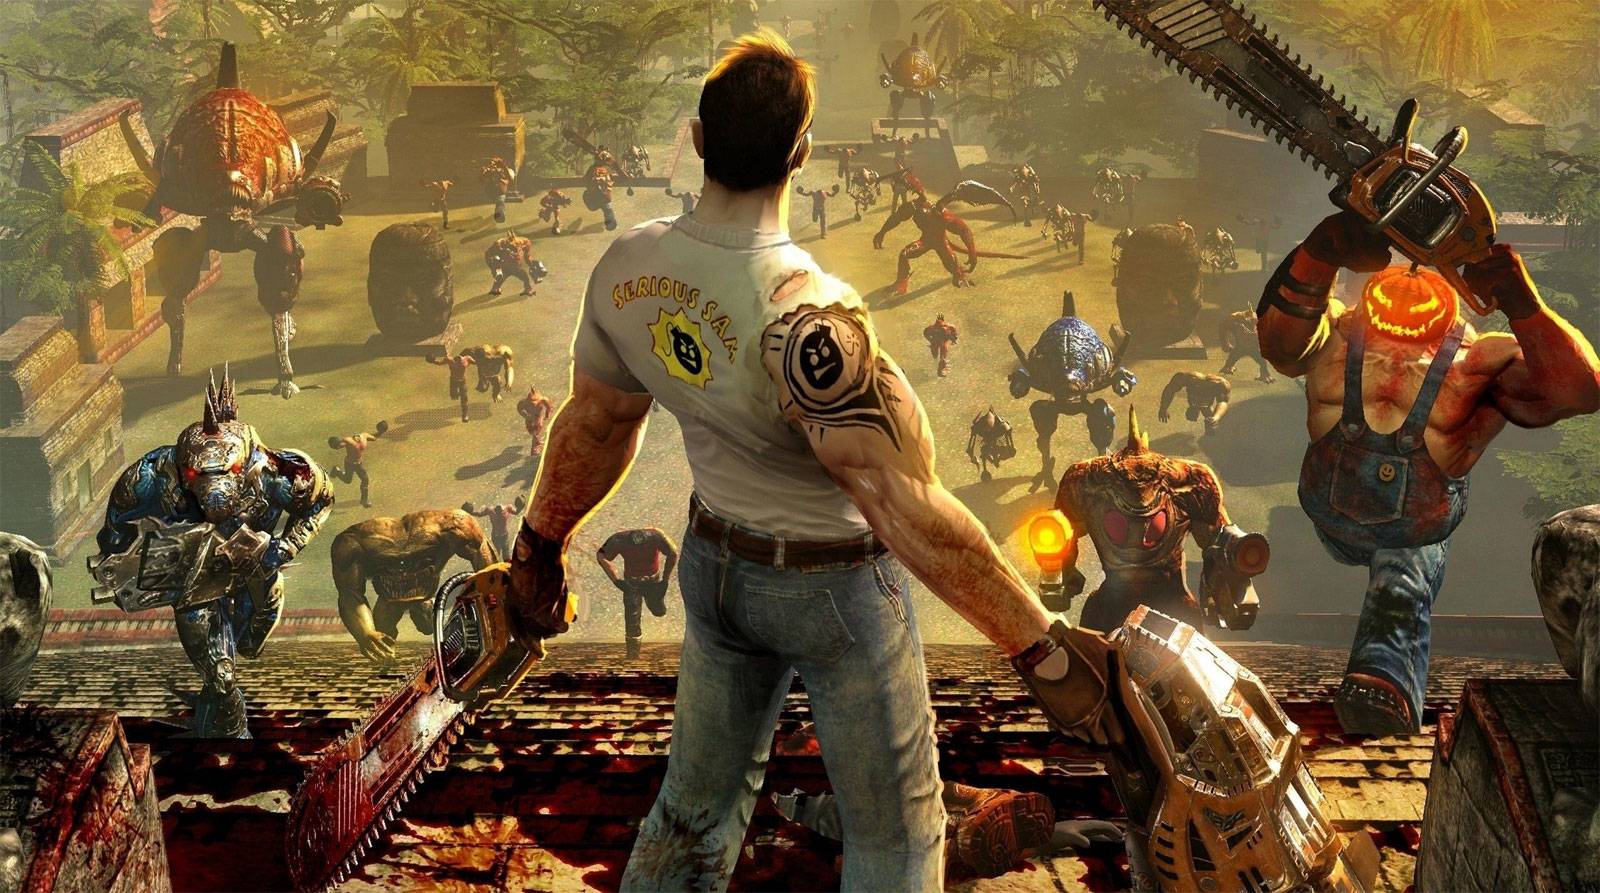 Serious Sam Collection pojawi się na konsolach PS4 i Xbox One